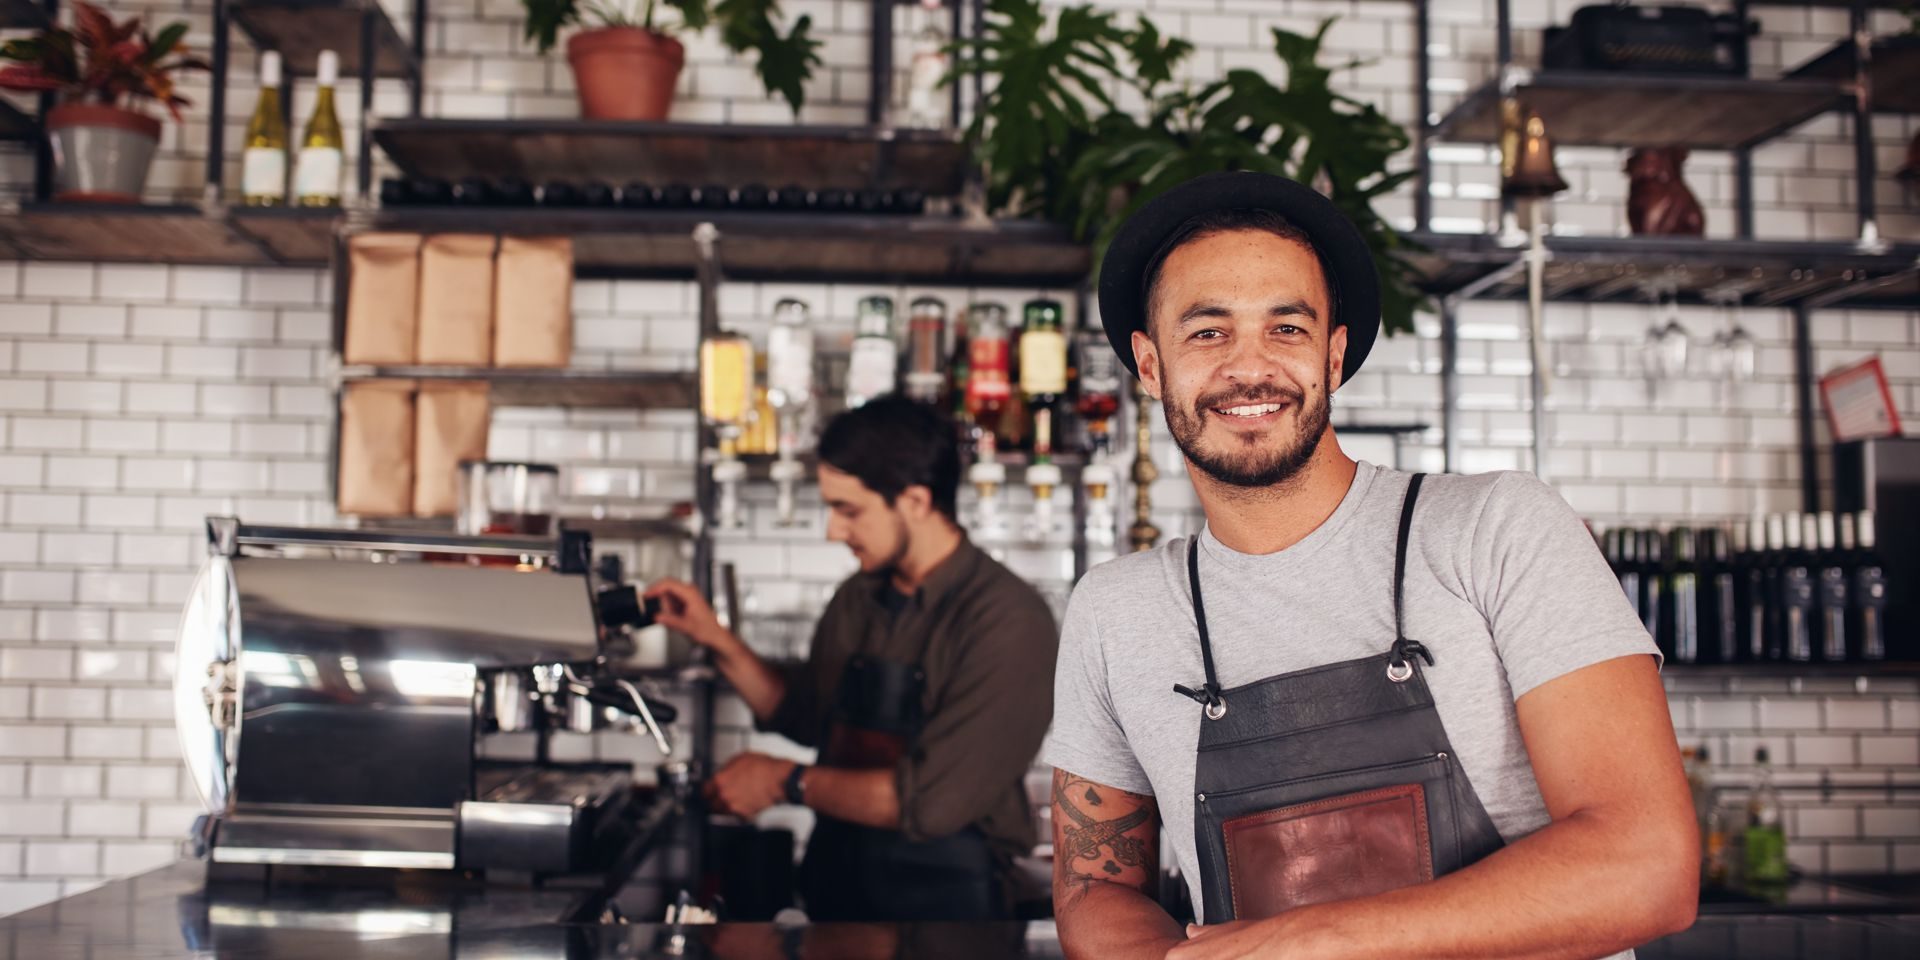 Portrait of male coffee shop owner standing at the counter with barista working in background making drinks.